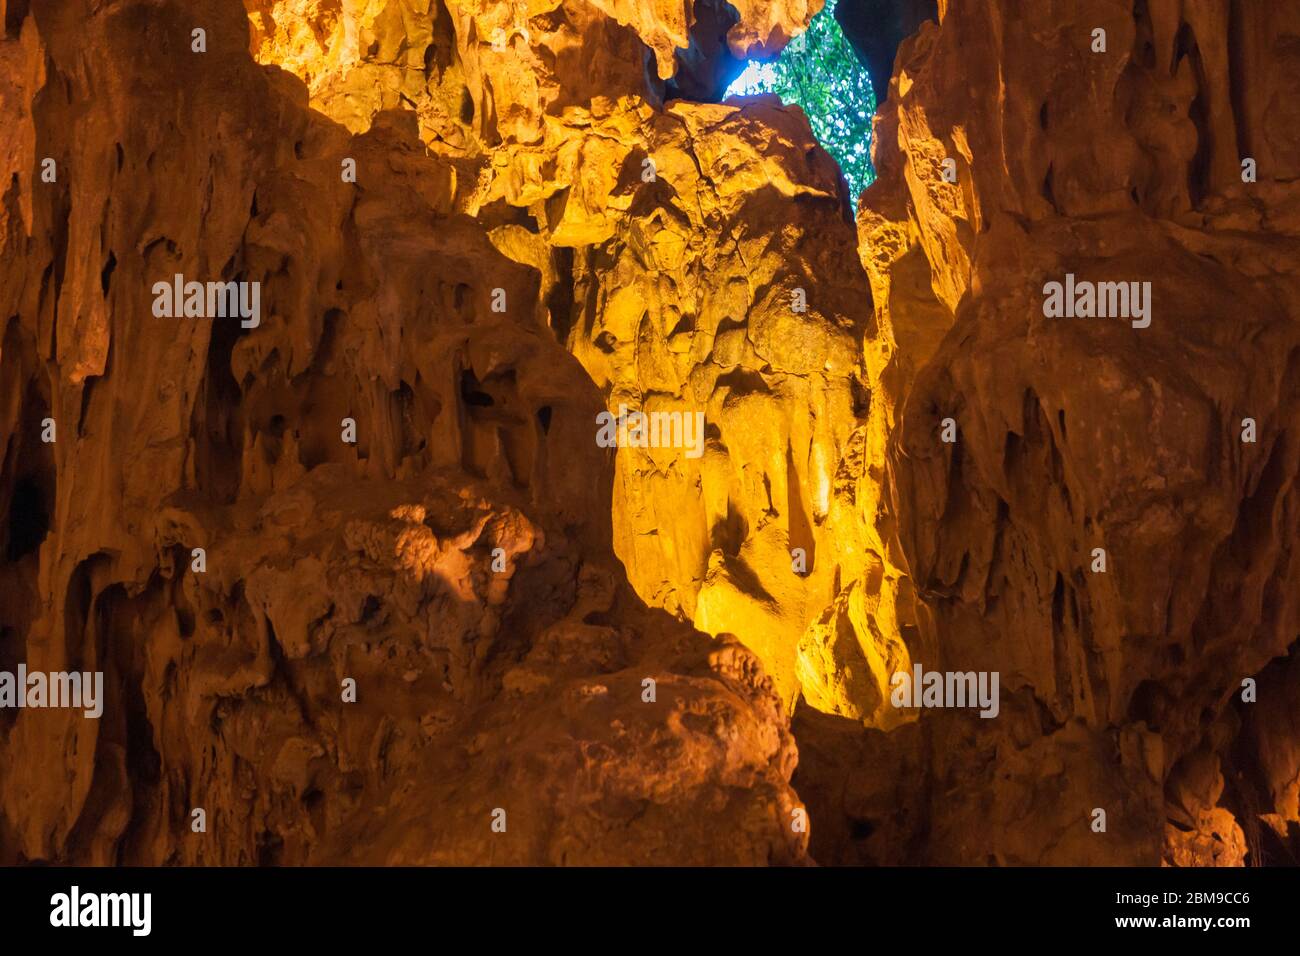 Hang Sung Sot Cave, also known as the cave of surprises, is one of  most popular tourist attraction and largest caves in Halong Bay, discovered Vietna Stock Photo